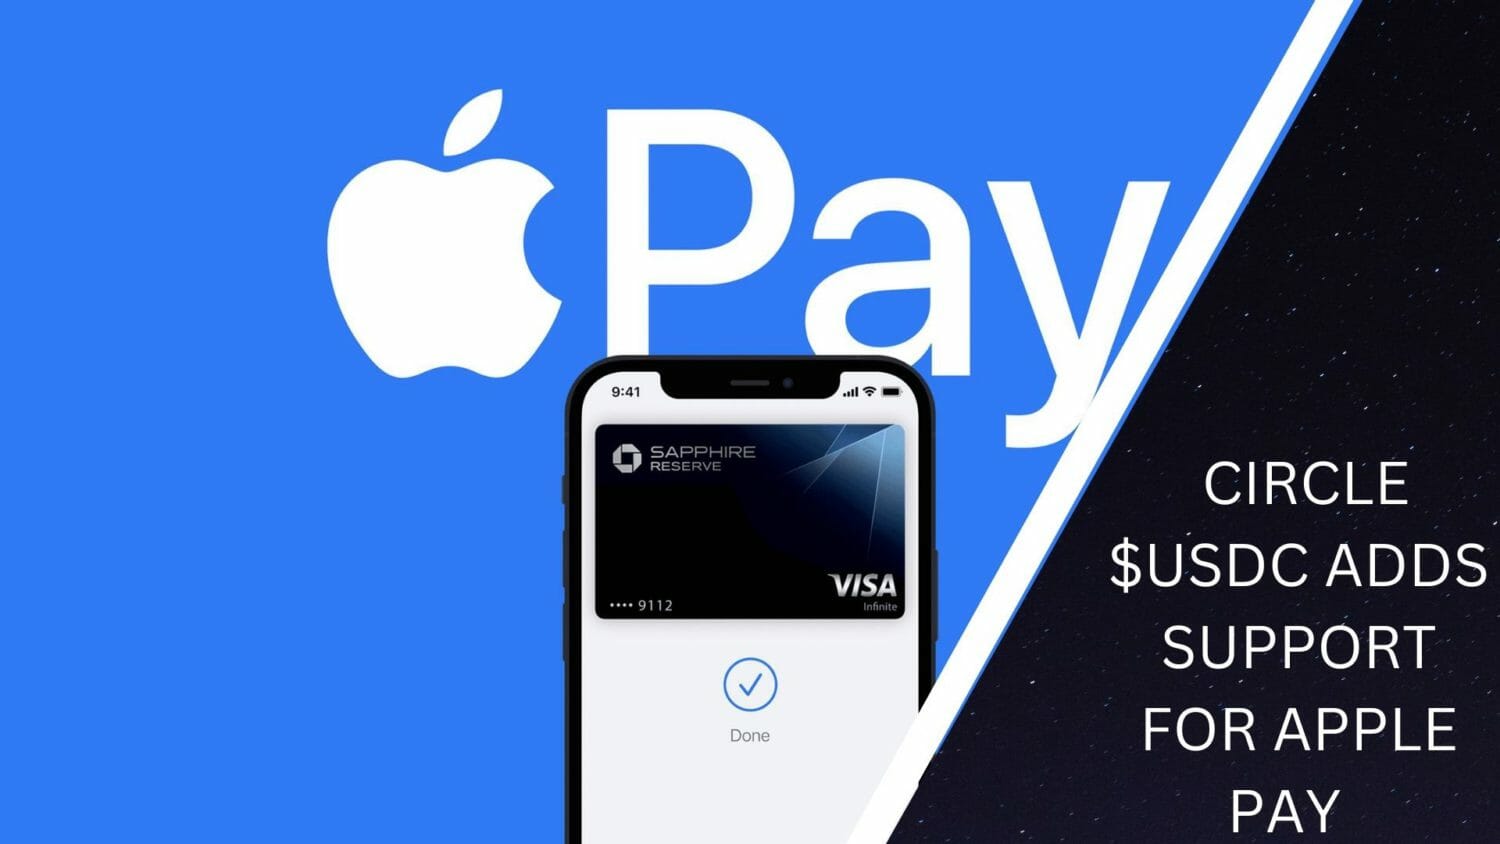 Circle $Usdc Adds Support For Apple Pay